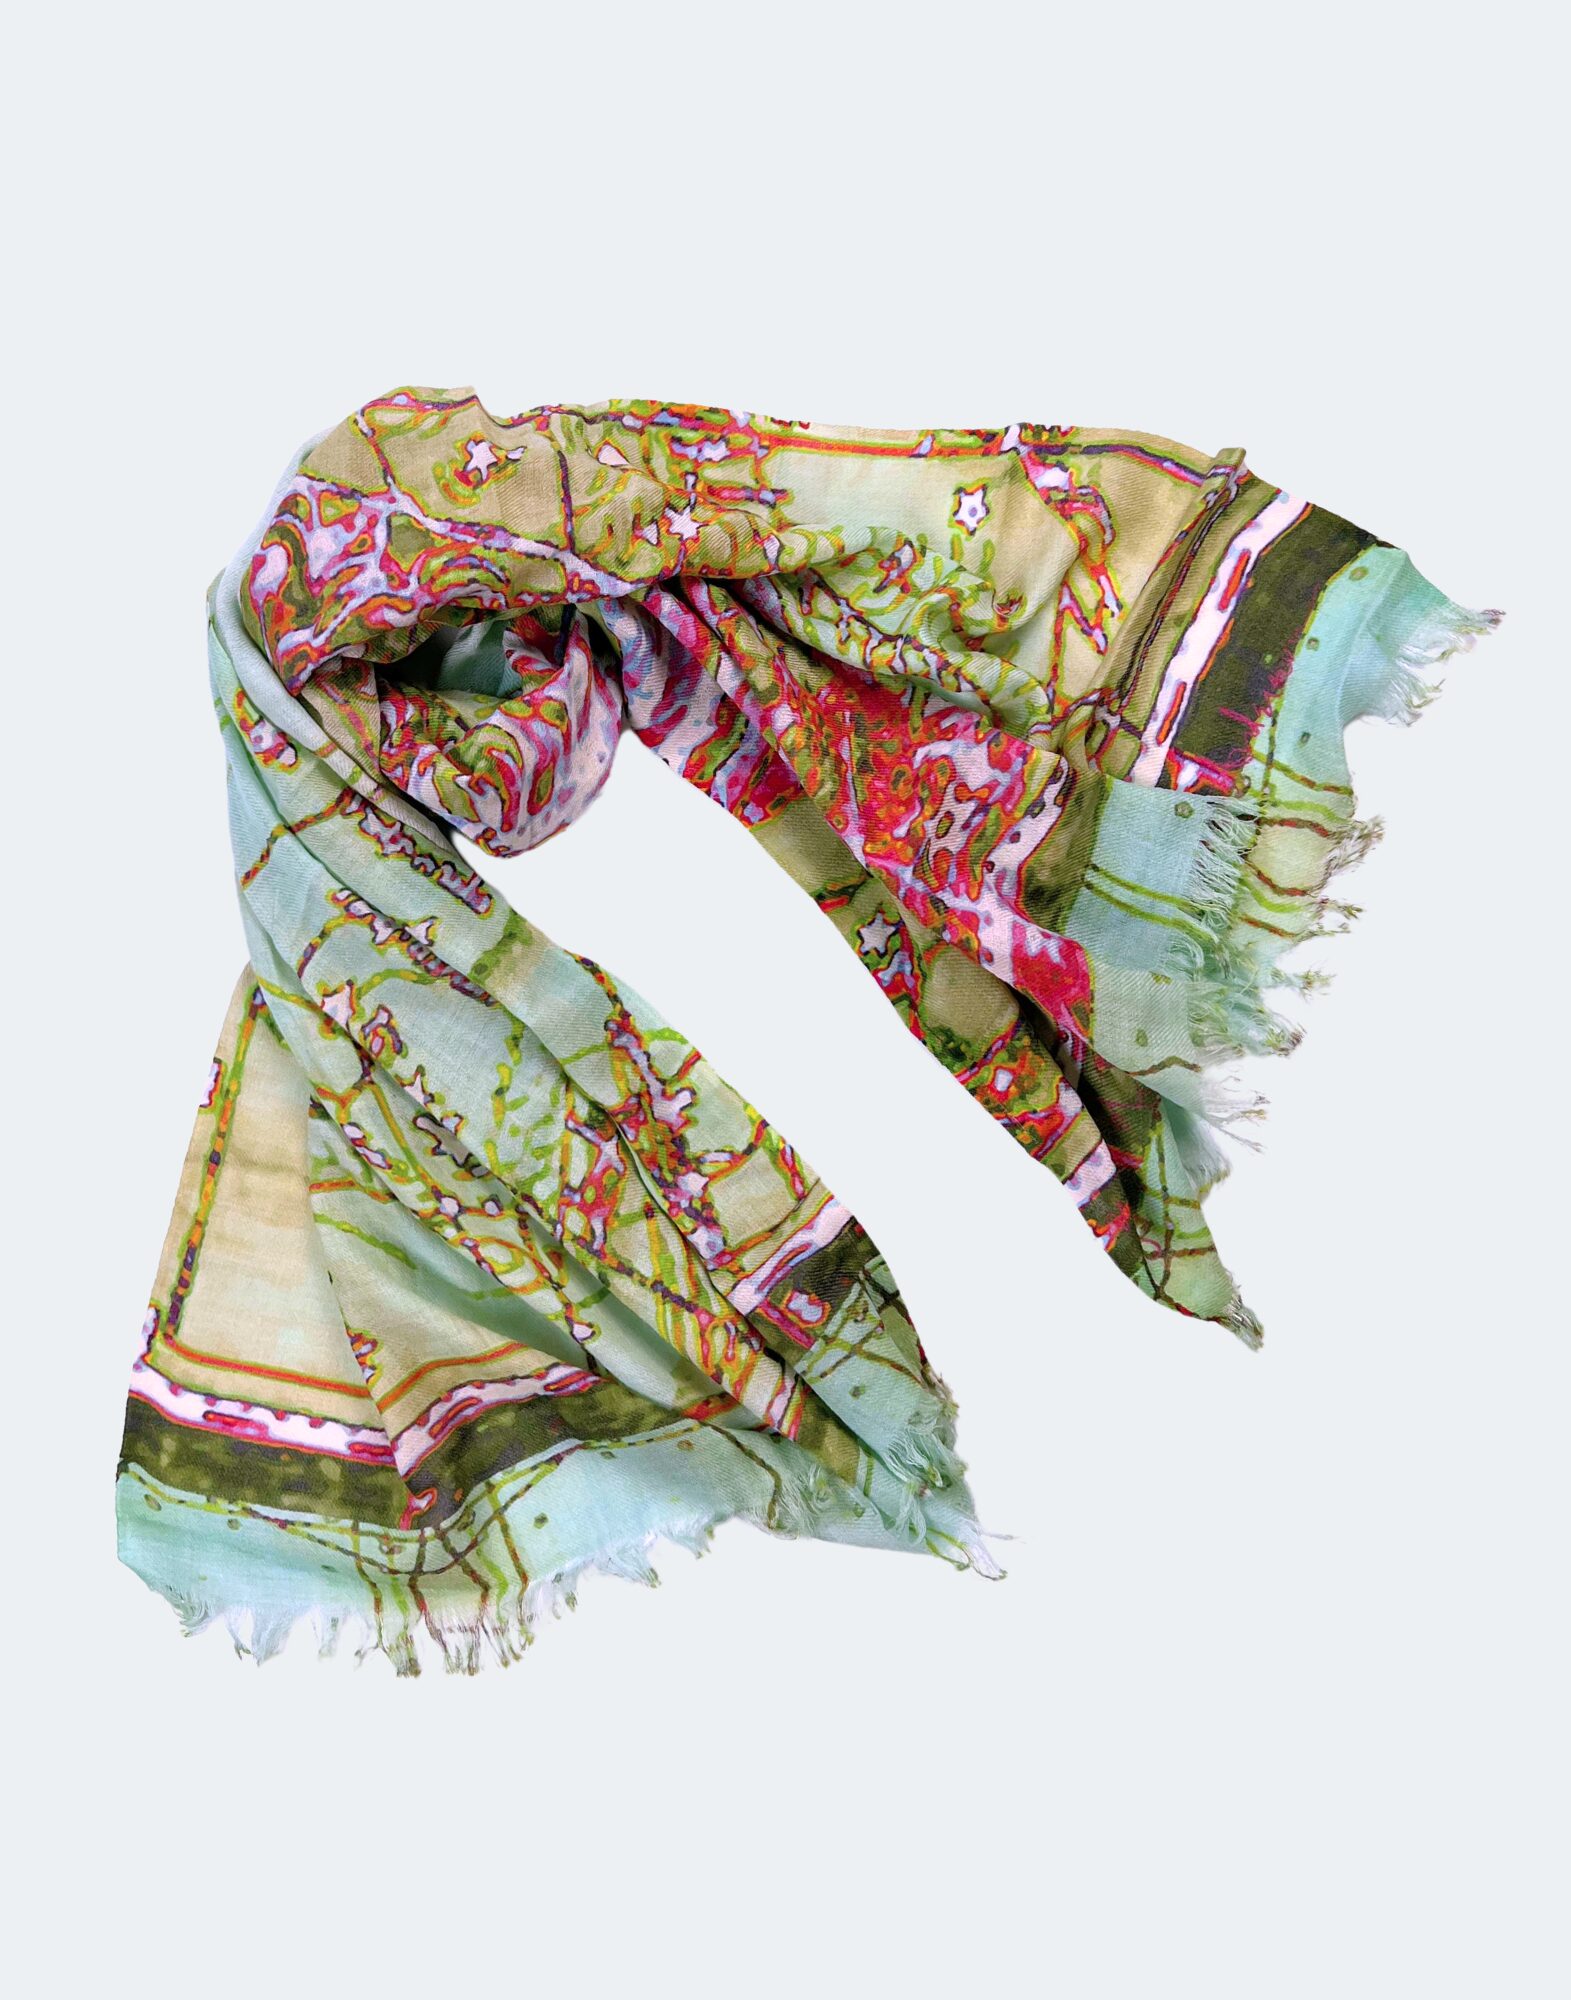 Pale blues, greens, and pinks make up this print of a constellation of two horses on this scarf